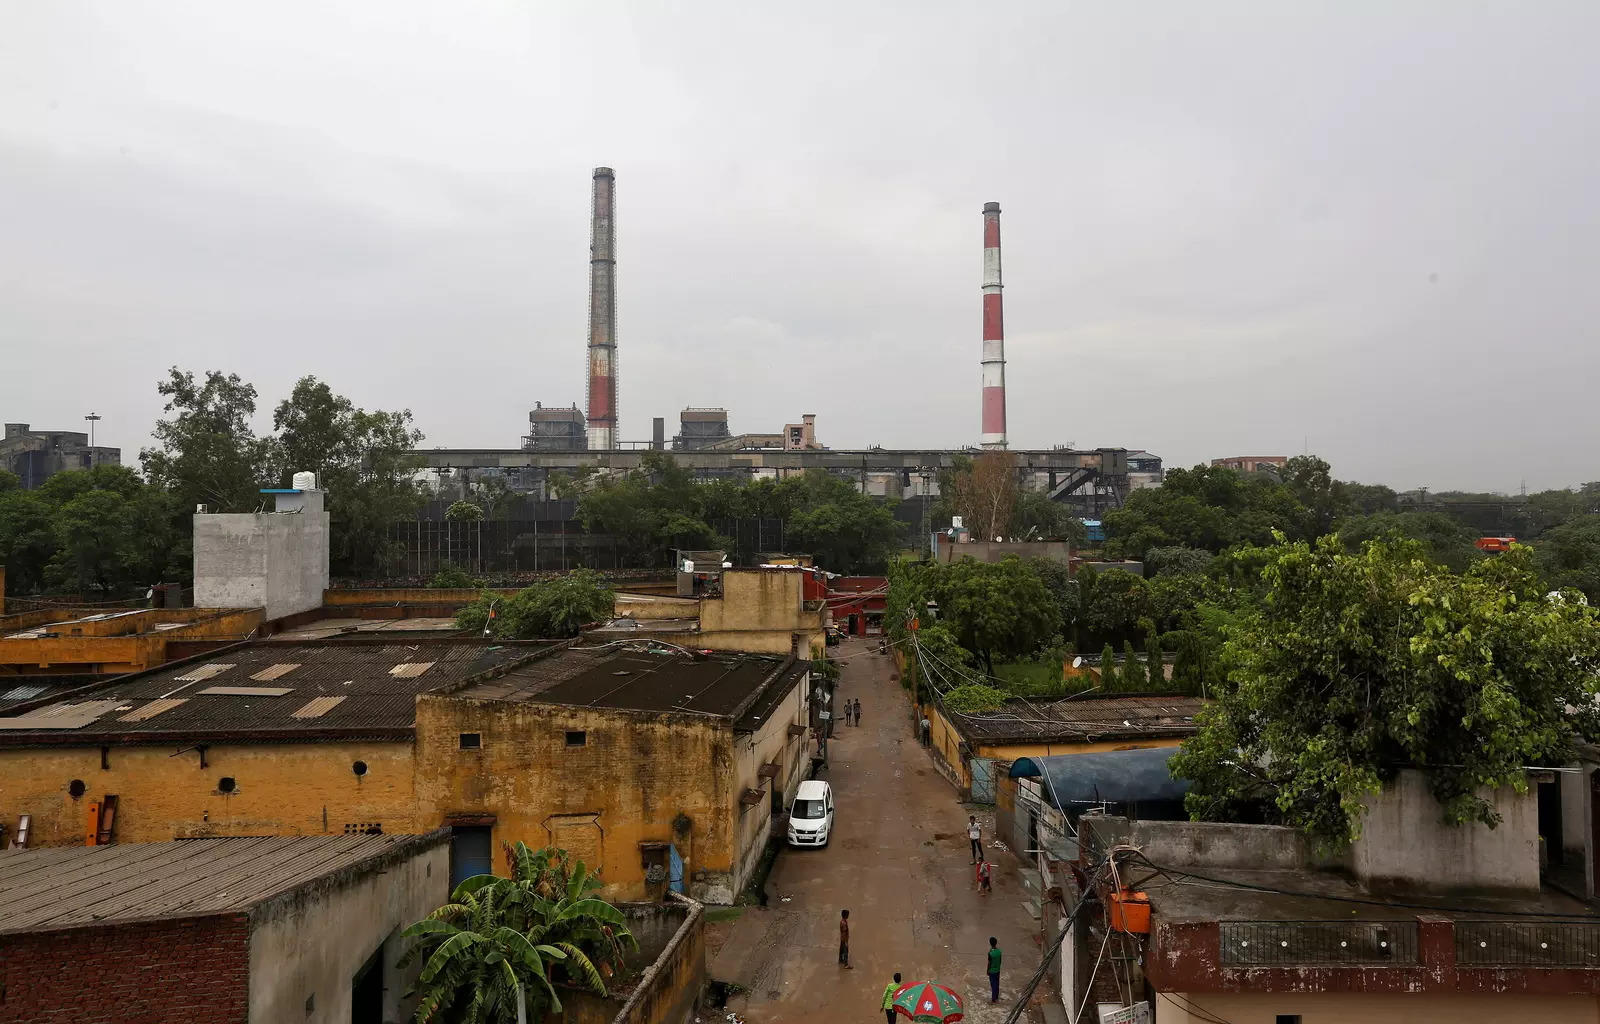 A coal-fired power plant in New Delhi. (File photo: Reuters)